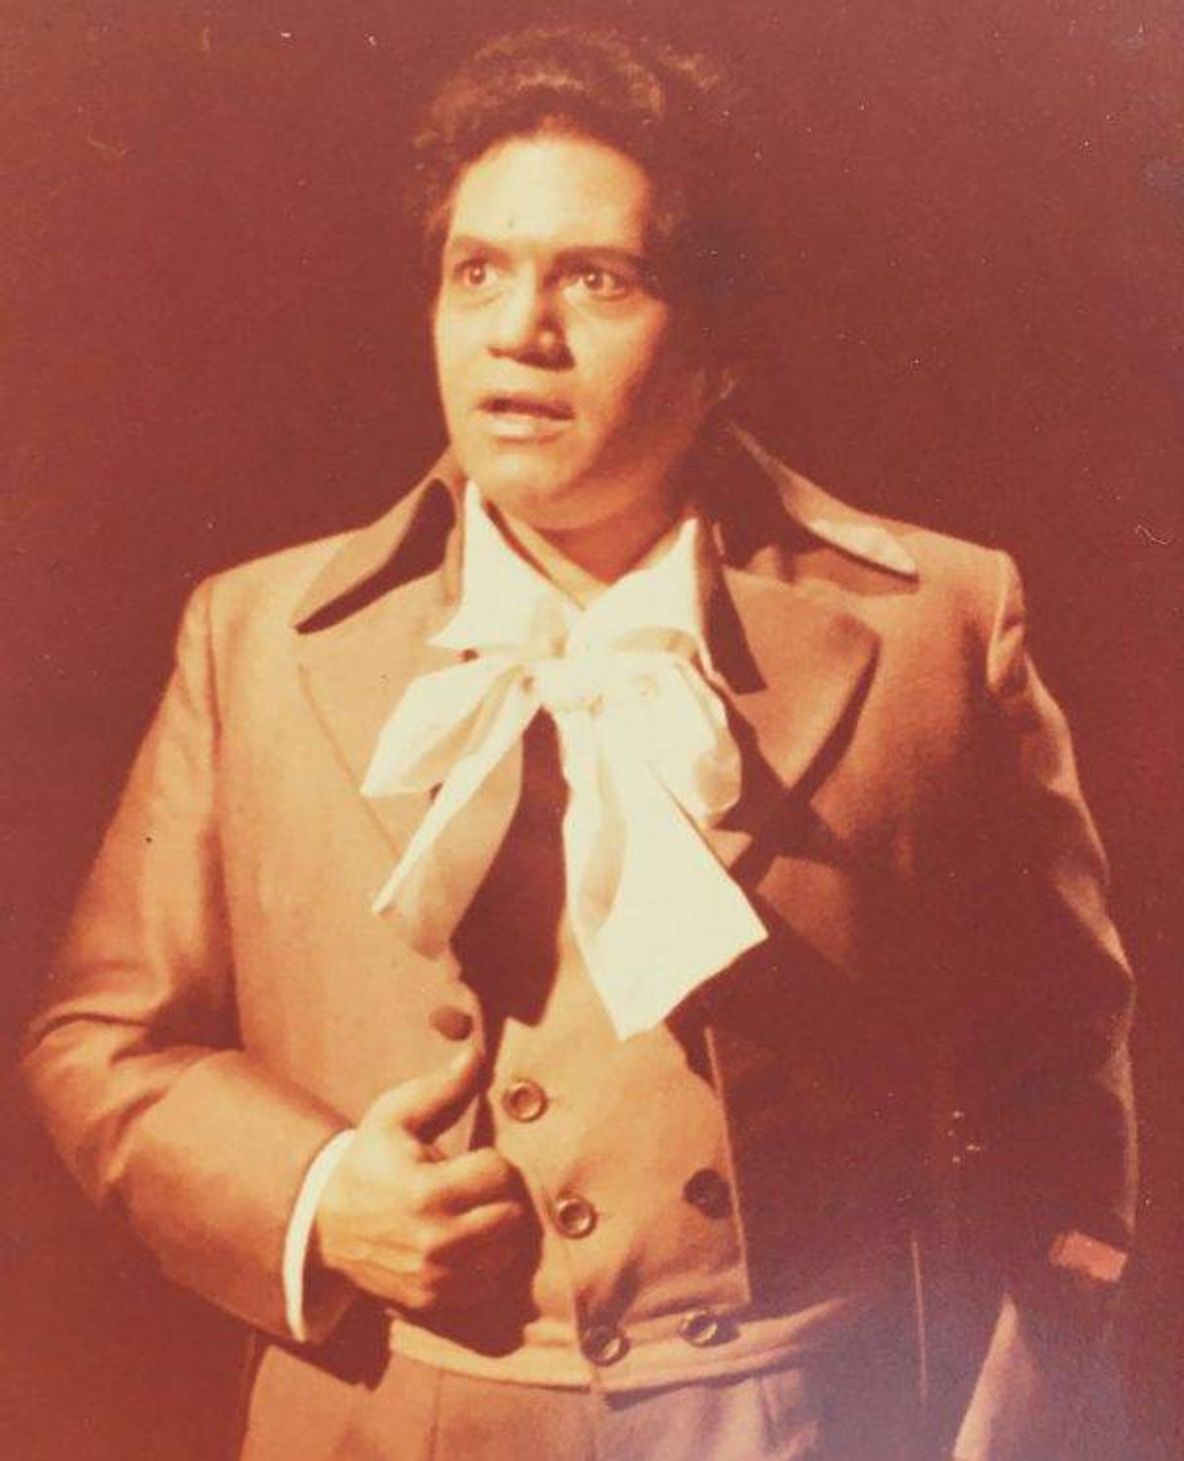 Emilio Moscoso performs in the opera Andrea Chénier in Passau, Germany (1978)